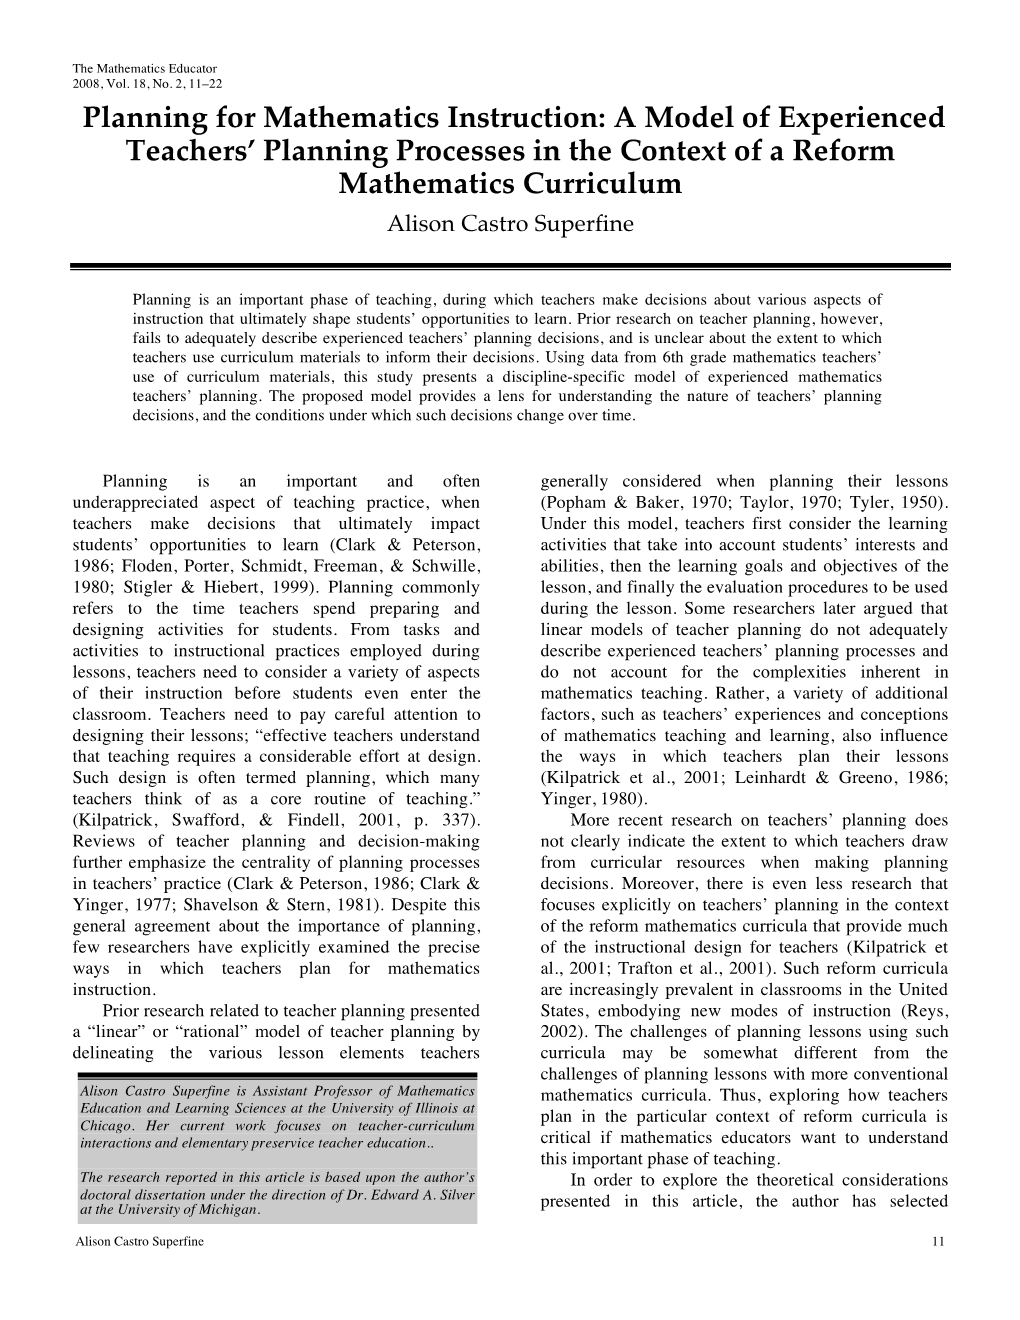 Planning for Mathematics Instruction: a Model of Experienced Teachers' Planning Processes in the Context of a Reform Mathemati